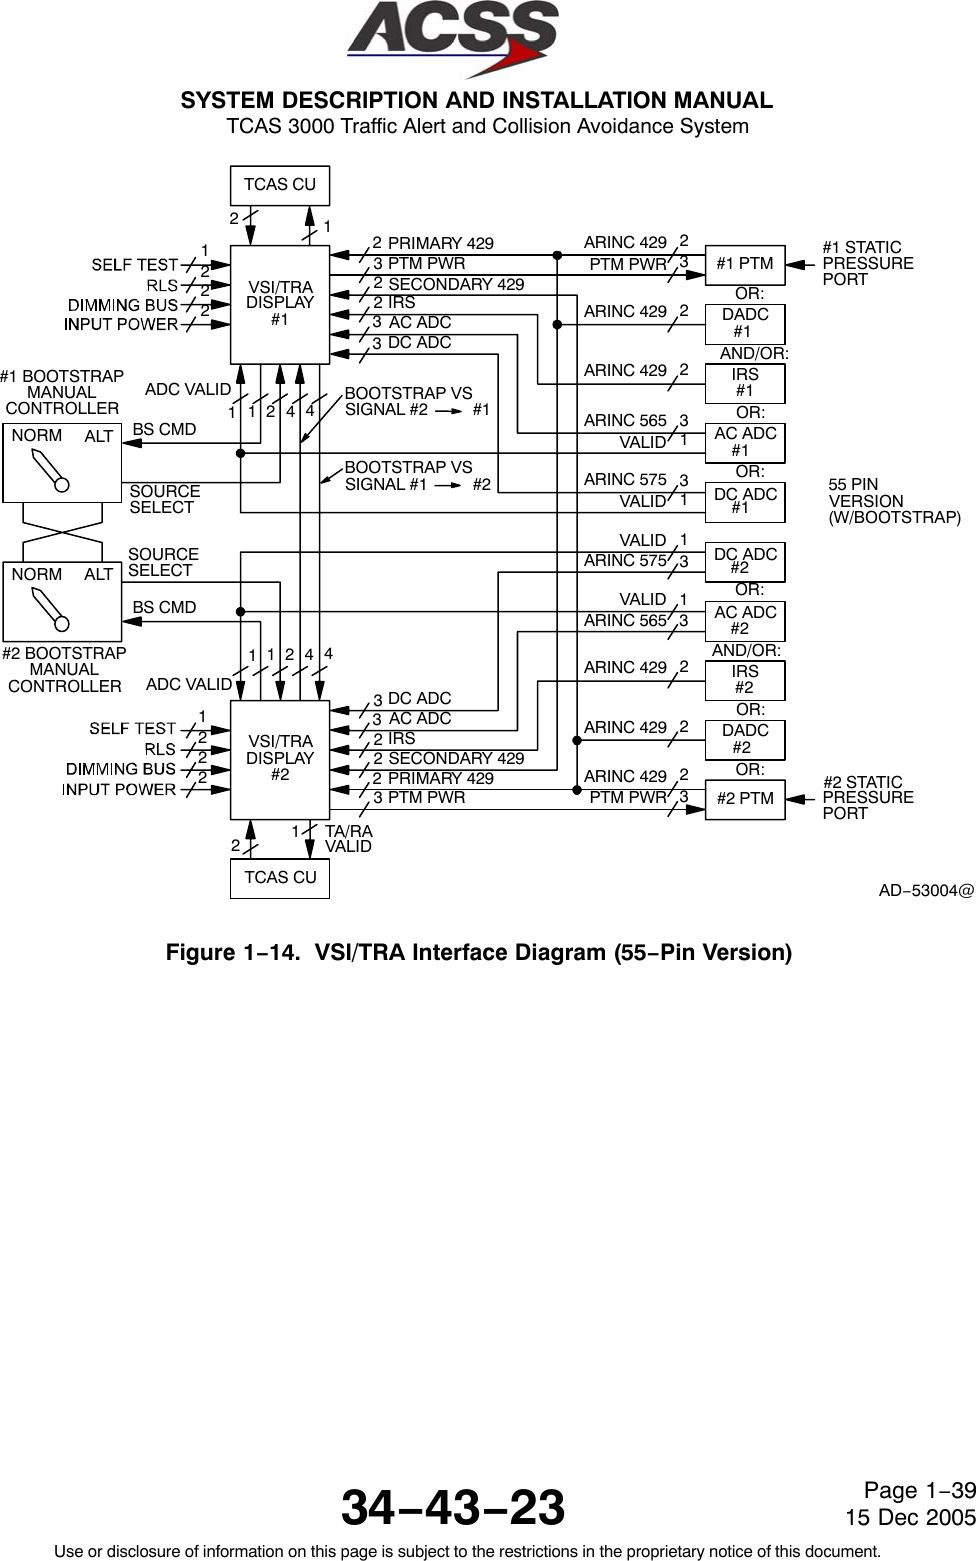 SYSTEM DESCRIPTION AND INSTALLATION MANUAL TCAS 3000 Traffic Alert and Collision Avoidance System34−43−23Use or disclosure of information on this page is subject to the restrictions in the proprietary notice of this document.Page 1−3915 Dec 2005TCAS CUVSI/TRADISPLAY#11222222231TCAS CUVSI/TRADISPLAY#21222222#1 PTMDADC#1AC ADC#1DC ADC#1ARINC 429PTM PWRARINC 429OR:ARINC 565VALIDVALIDOR:OR:223311#1 STATICPRESSUREPORTAND/OR:IRS#1#2 PTMARINC 429PTM PWR23#2 STATICPRESSUREPORTDADC#2ARINC 429 2IRS#2AC ADC#2DC ADC#2NORM ALTNORM ALTSOURCESOURCEPRIMARY 429PTM PWRSECONDARY 429IRSAC ADCDC ADC333DC ADCAC ADCIRSSECONDARY 429PRIMARY 429PTM PWR21TA/RAVALID2114421144ADC VALIDBS CMDBS CMDADC VALID#1 BOOTSTRAPMANUALCONTROLLER#2 BOOTSTRAPMANUALCONTROLLER55 PINVERSION(W/BOOTSTRAP)AD−53004@OR:OR:OR:AND/OR:33ARINC 575 3ARINC 565 3ARINC 429 2VALID 1VALID 1BOOTSTRAP VSSIGNAL #2          #1BOOTSTRAP VSSIGNAL #1          #2SELECTSELECTARINC 429 2ARINC 575 3Figure 1−14.  VSI/TRA Interface Diagram (55−Pin Version)